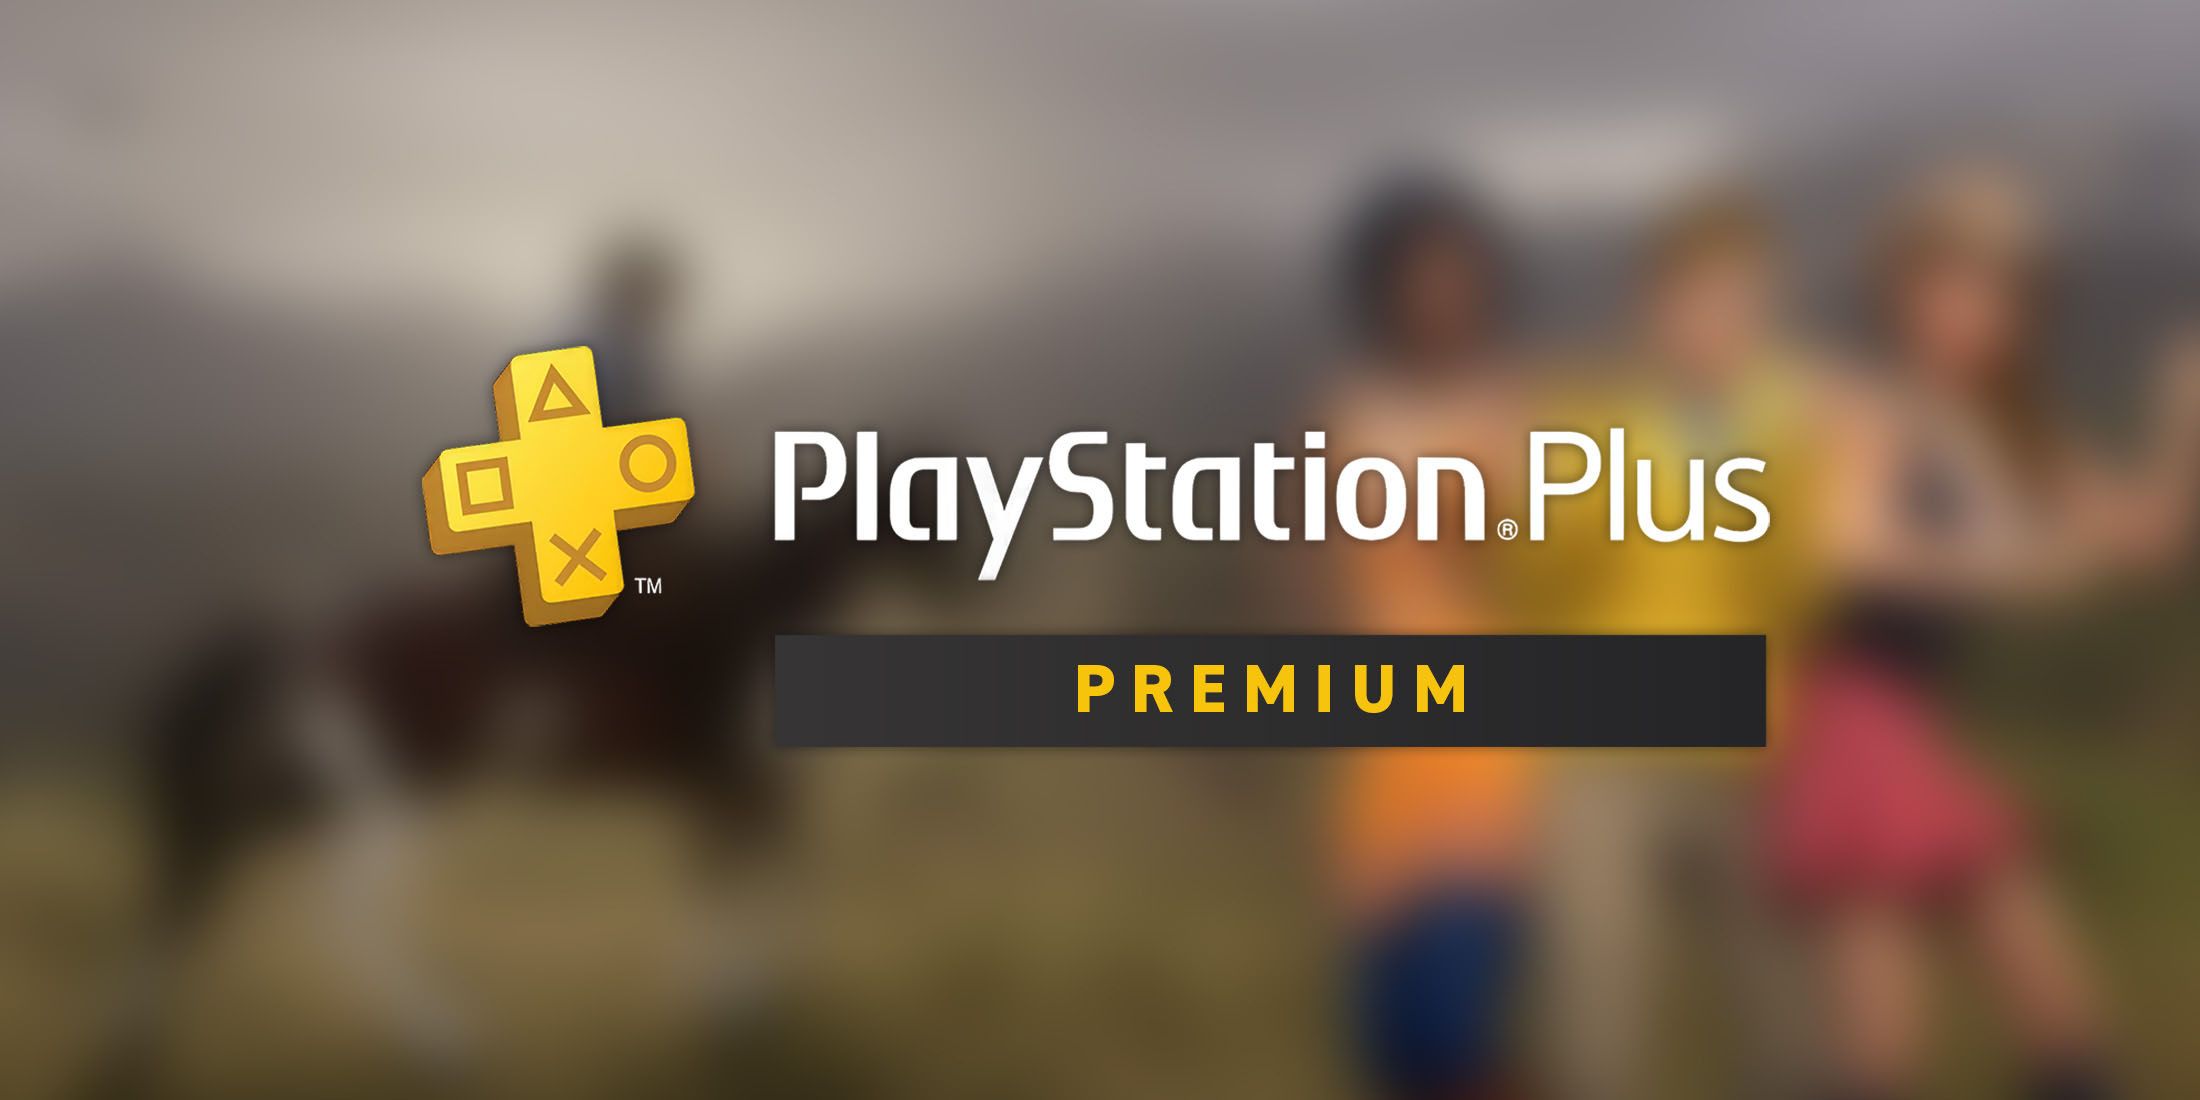 An image of the PlayStation Plus Premium logo in front of a blurred background.